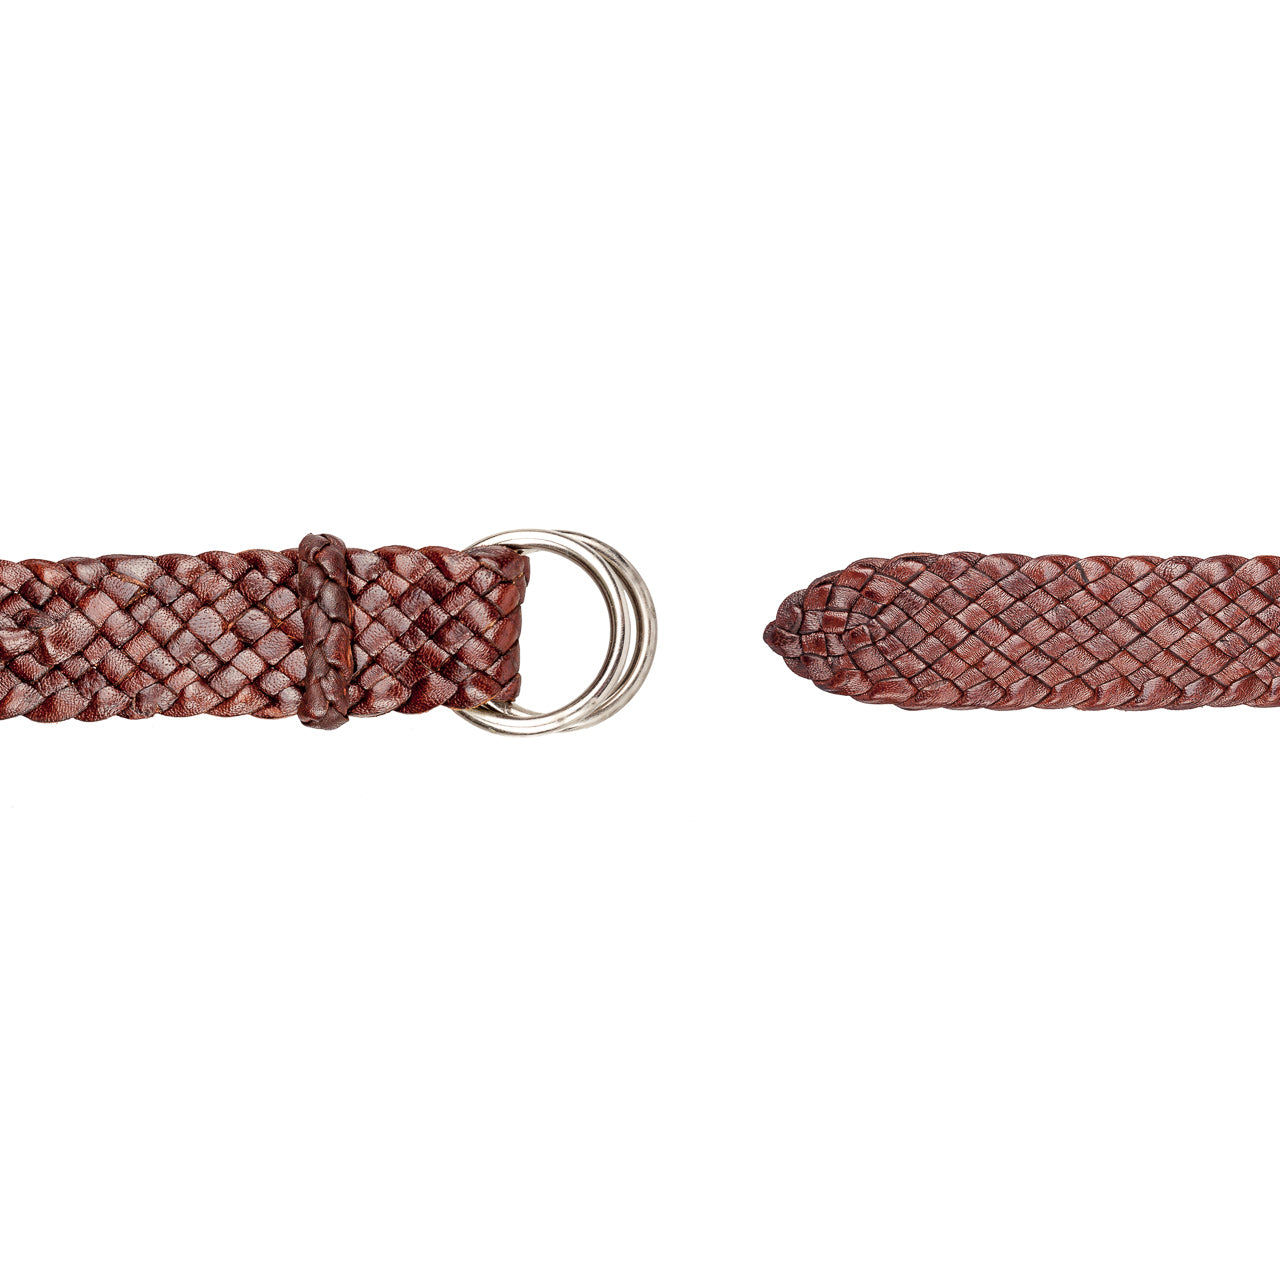 Premium Men's Leather Work Belts: Handcrafted in Australia from Full Grain Leather. Tough braided design, reinforced Croc ridge. Ideal for work